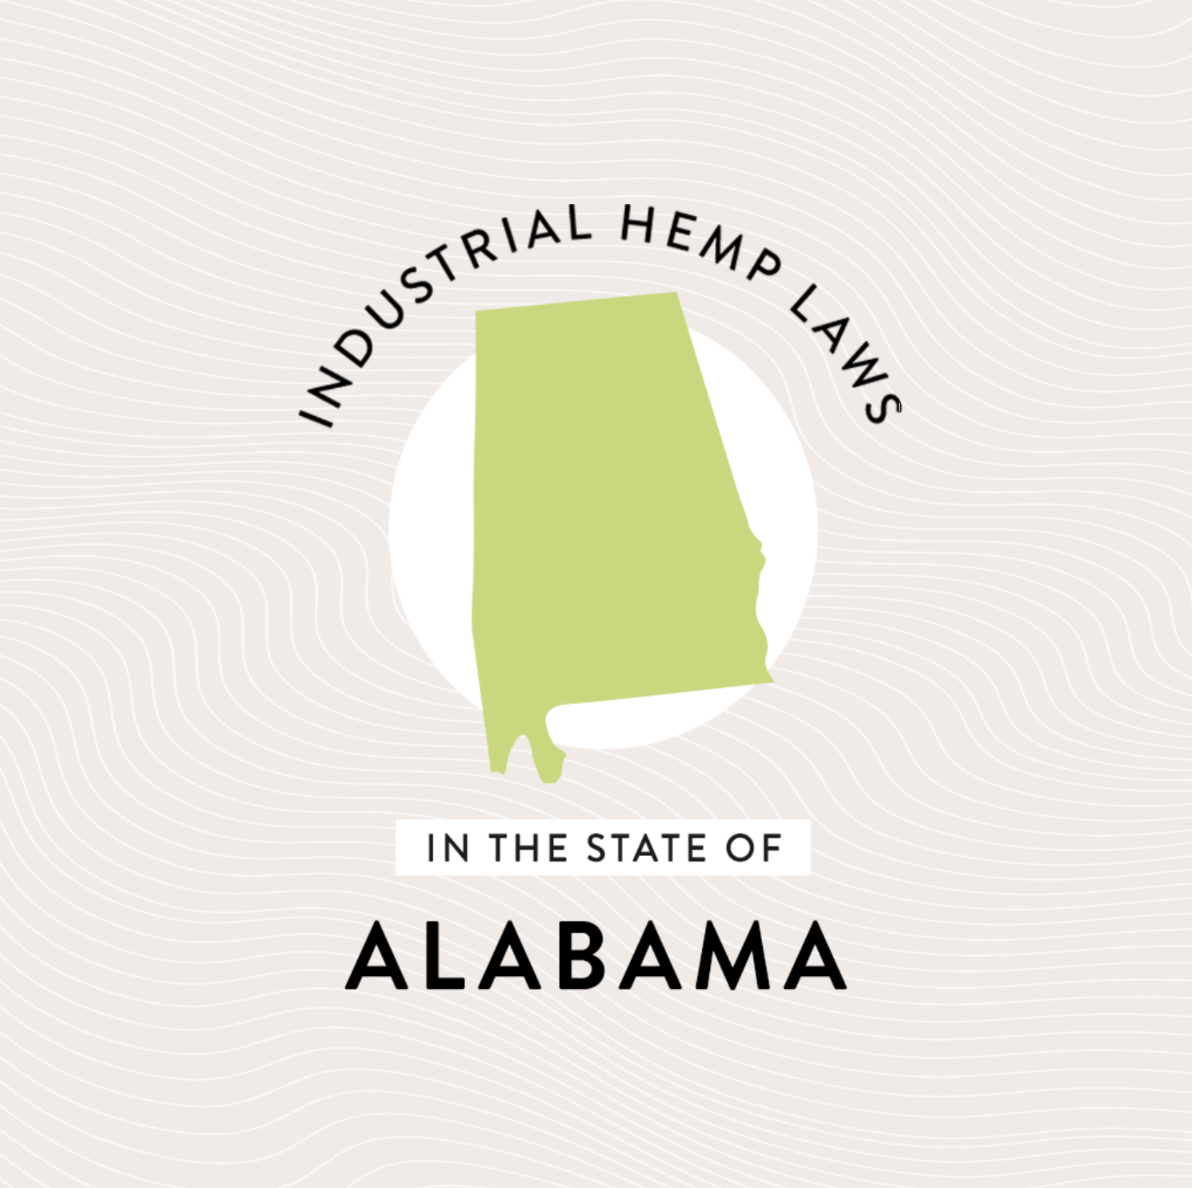 Industrial Hemp Laws in the State of Alabama